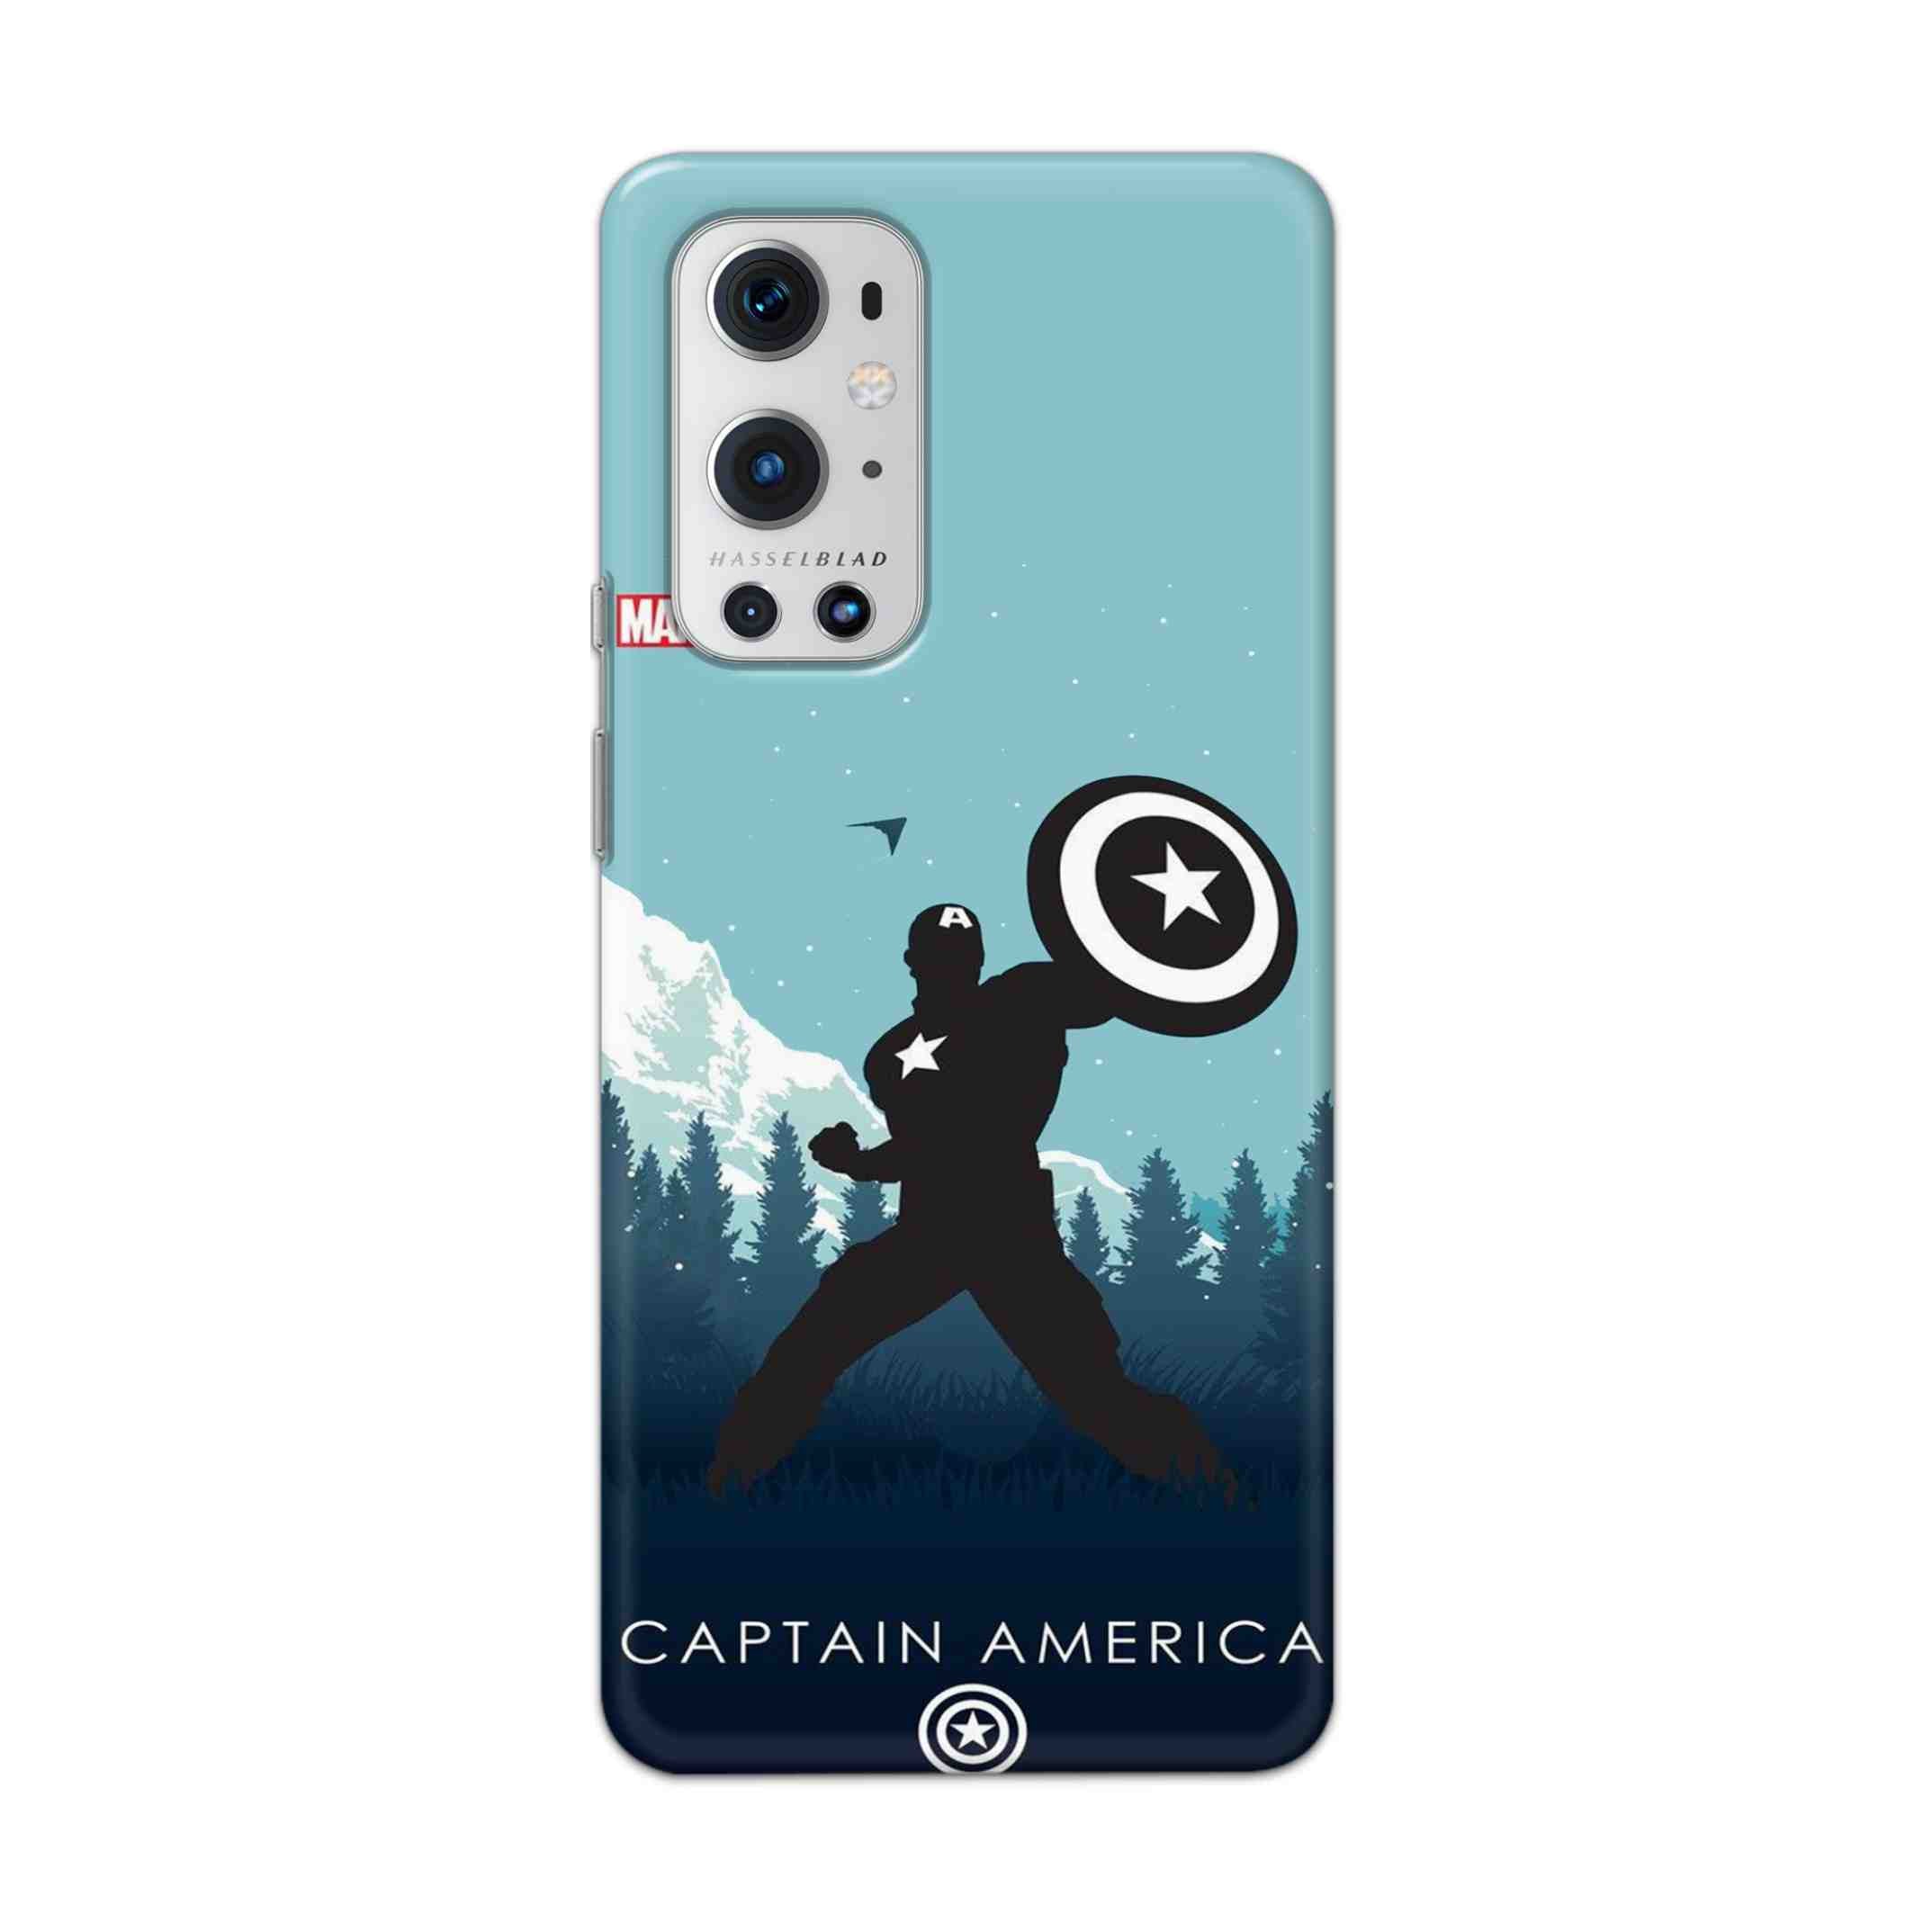 Buy Captain America Hard Back Mobile Phone Case Cover For OnePlus 9 Pro Online